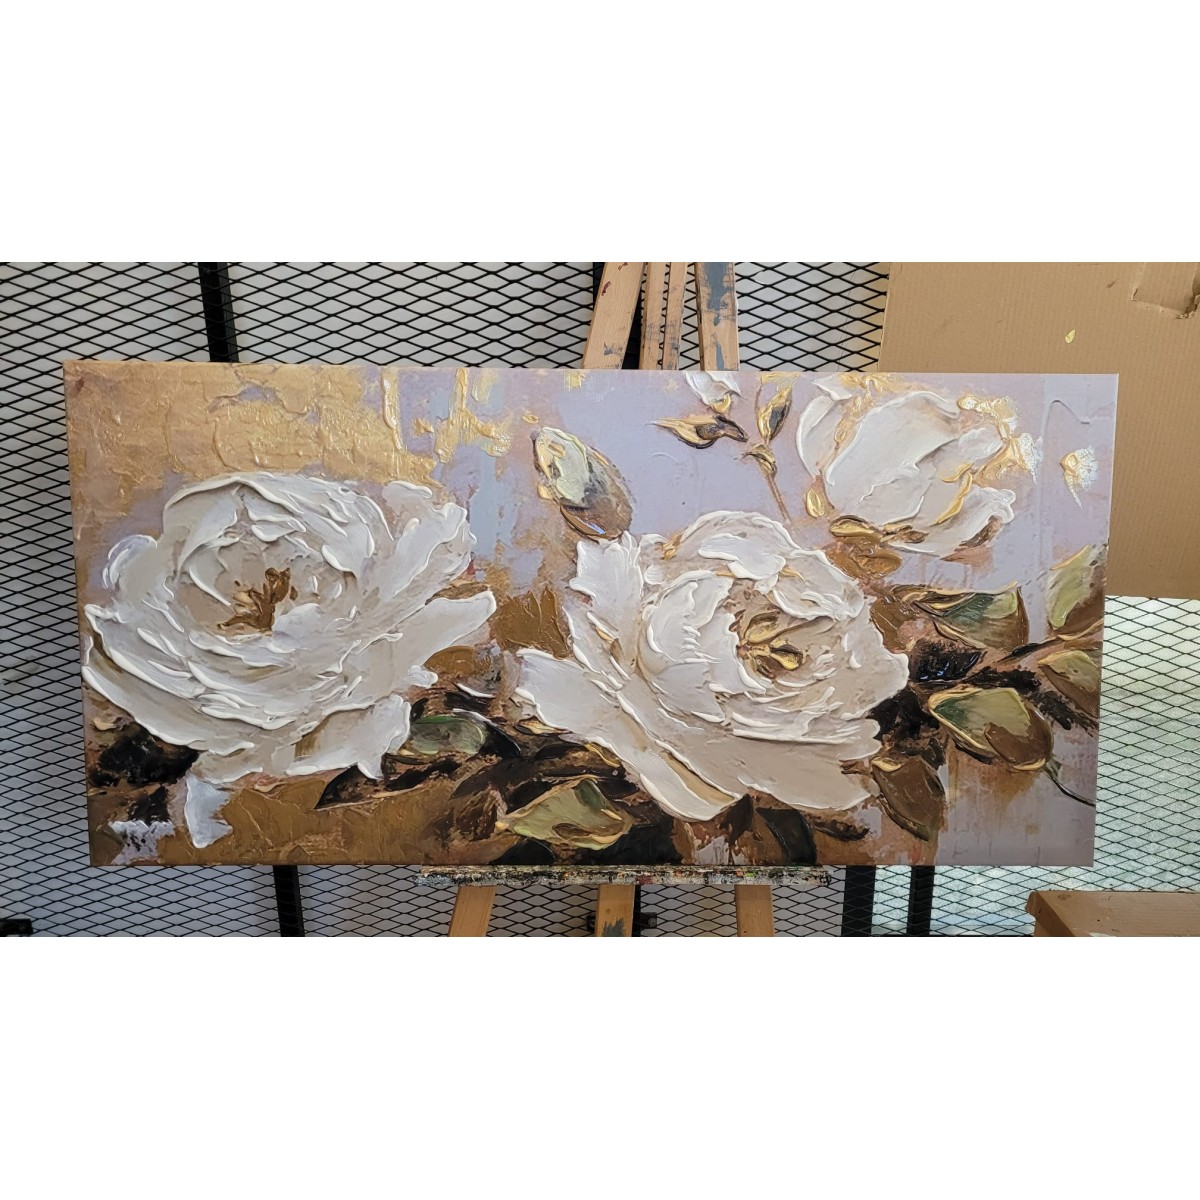 Cream Roses with Gold Leaf 3d Heavy Textured Partial Oil Painting